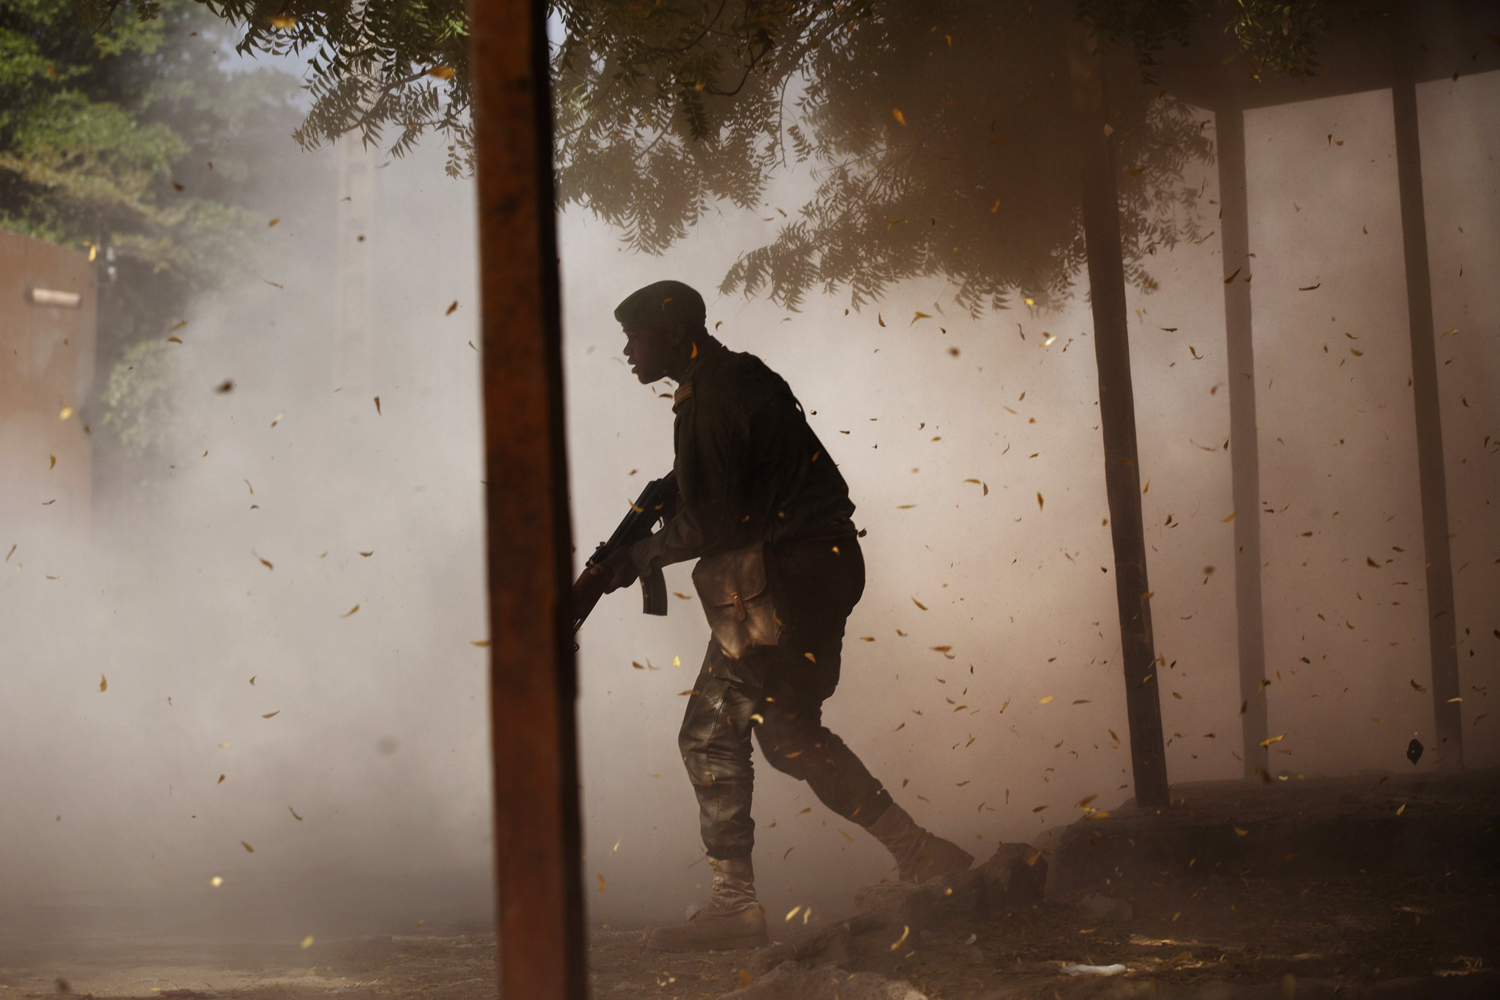 A Malian soldier takes cover amidst dust after a rocket propelled grenade was fired by his comrades in Gao